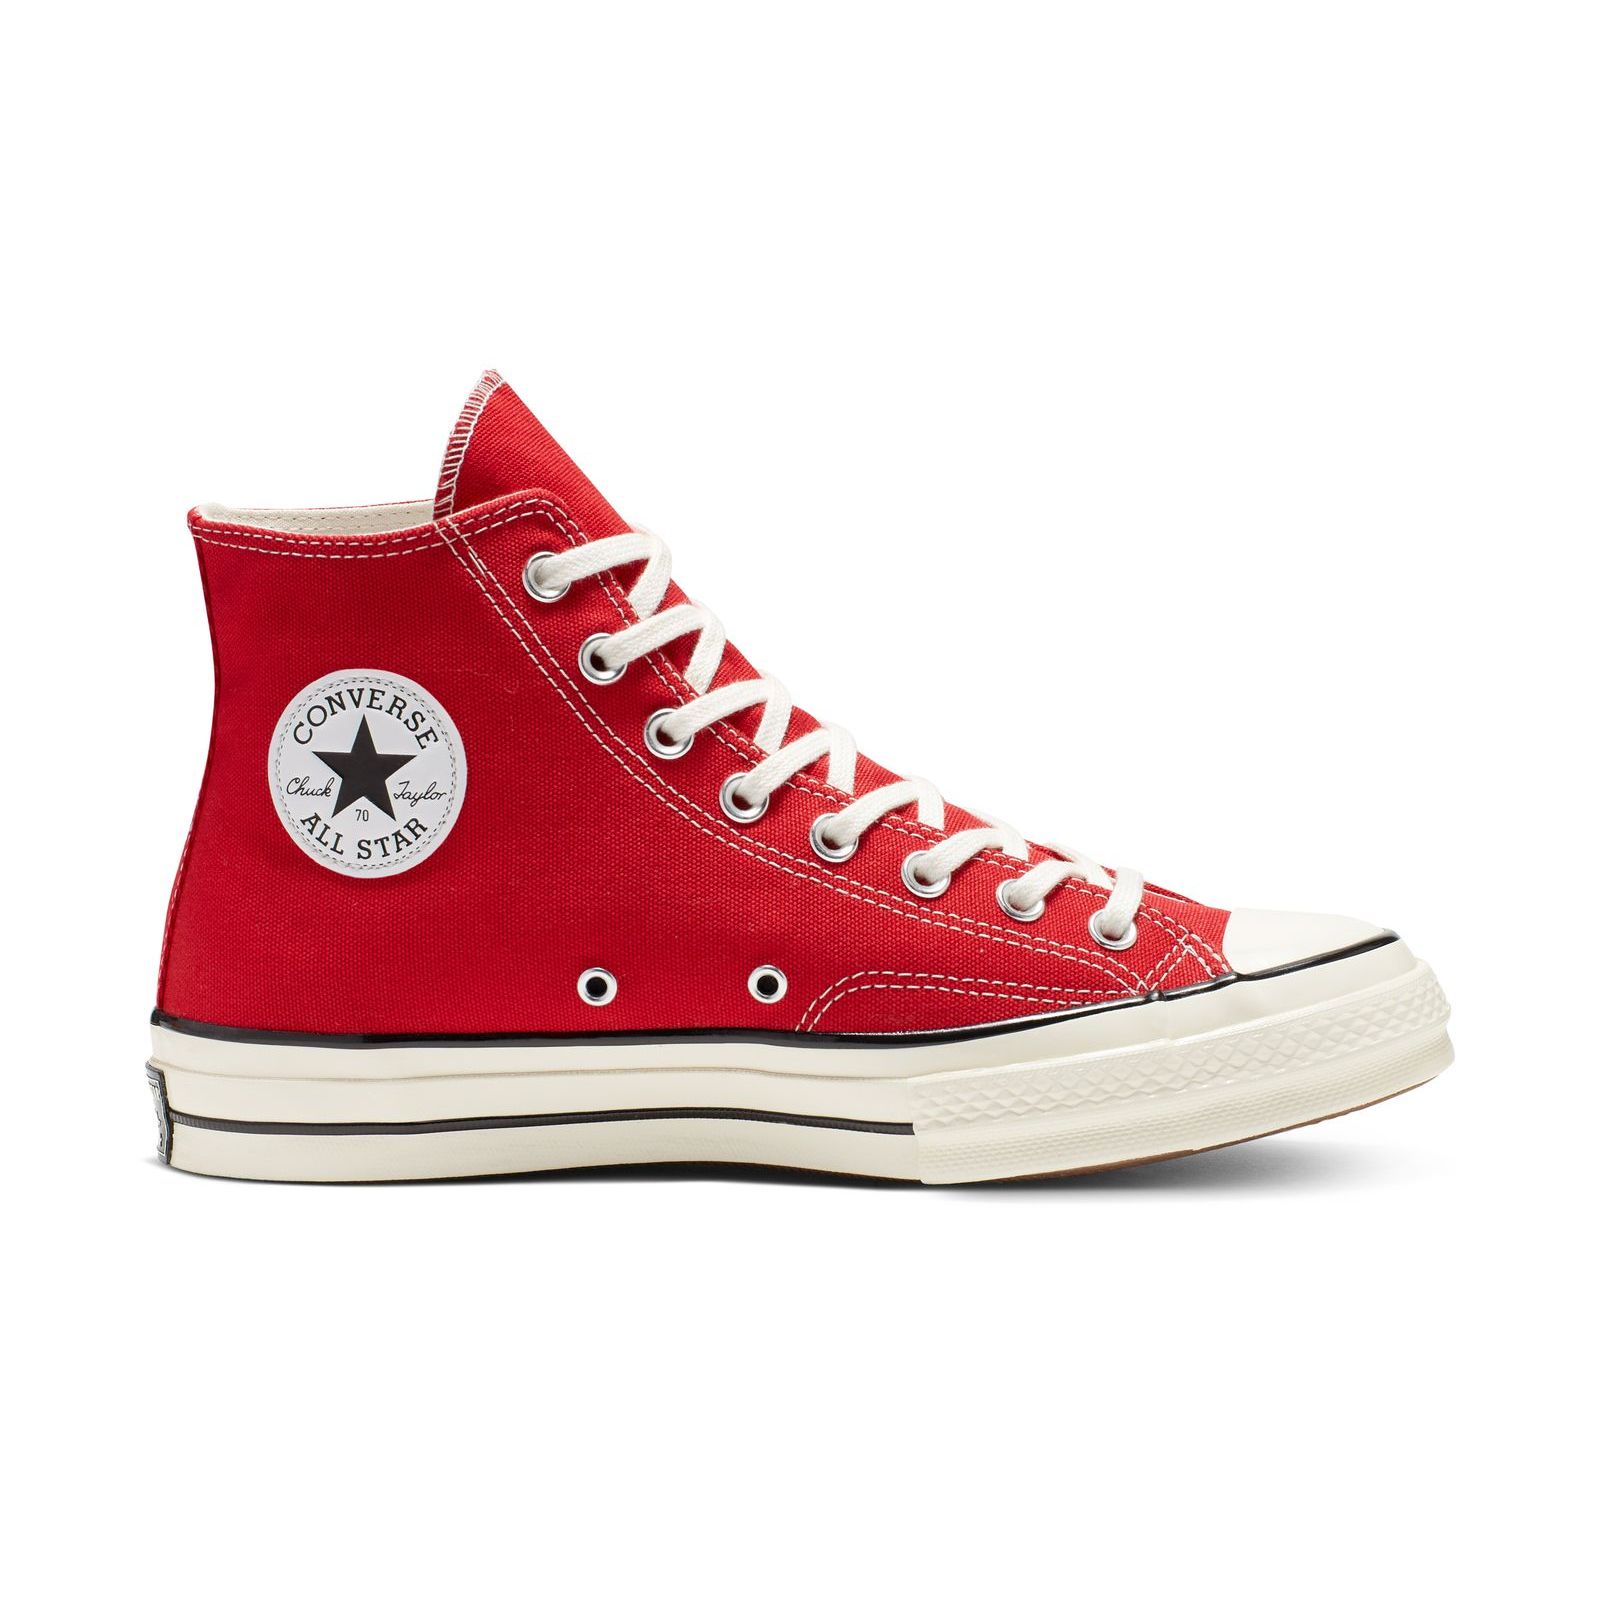 converse chuck taylor red price